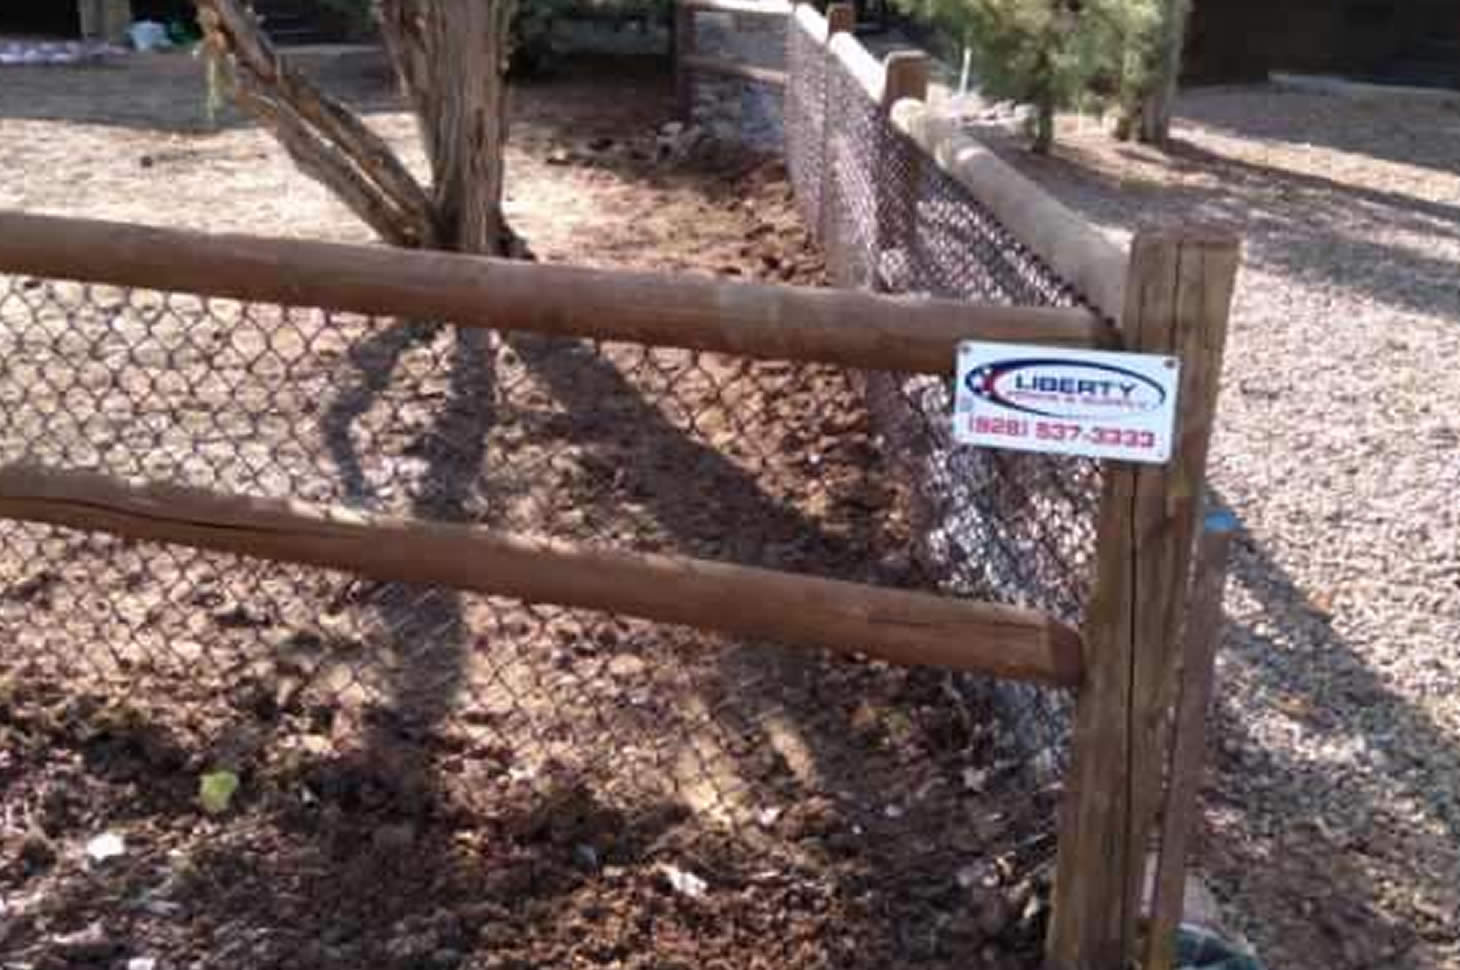 Lodgepole Chain Link Fence